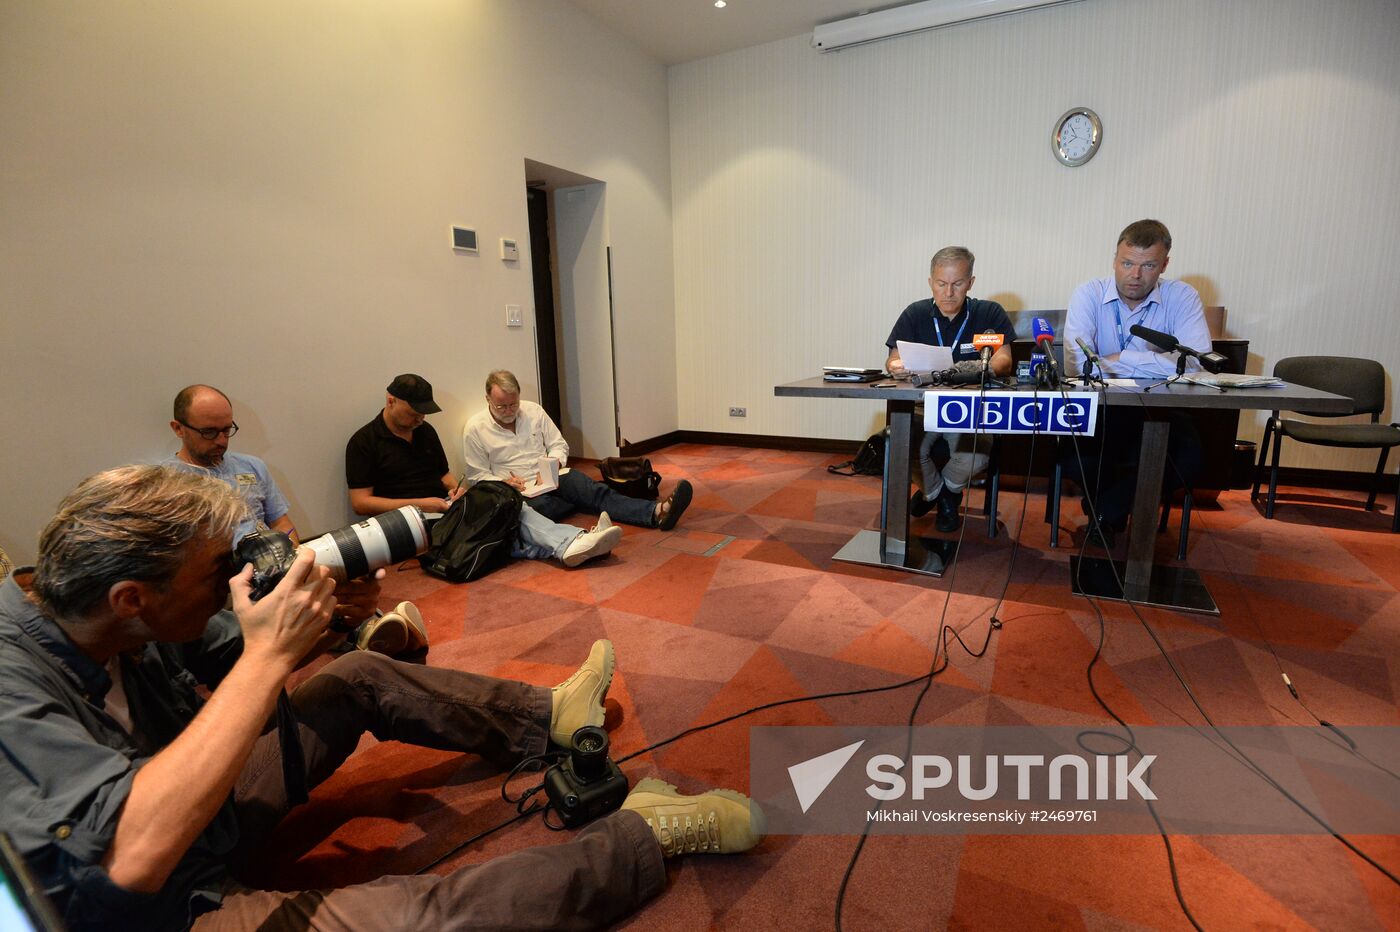 News conference of OSCE mission at Park Inn by Radisson Donetsk